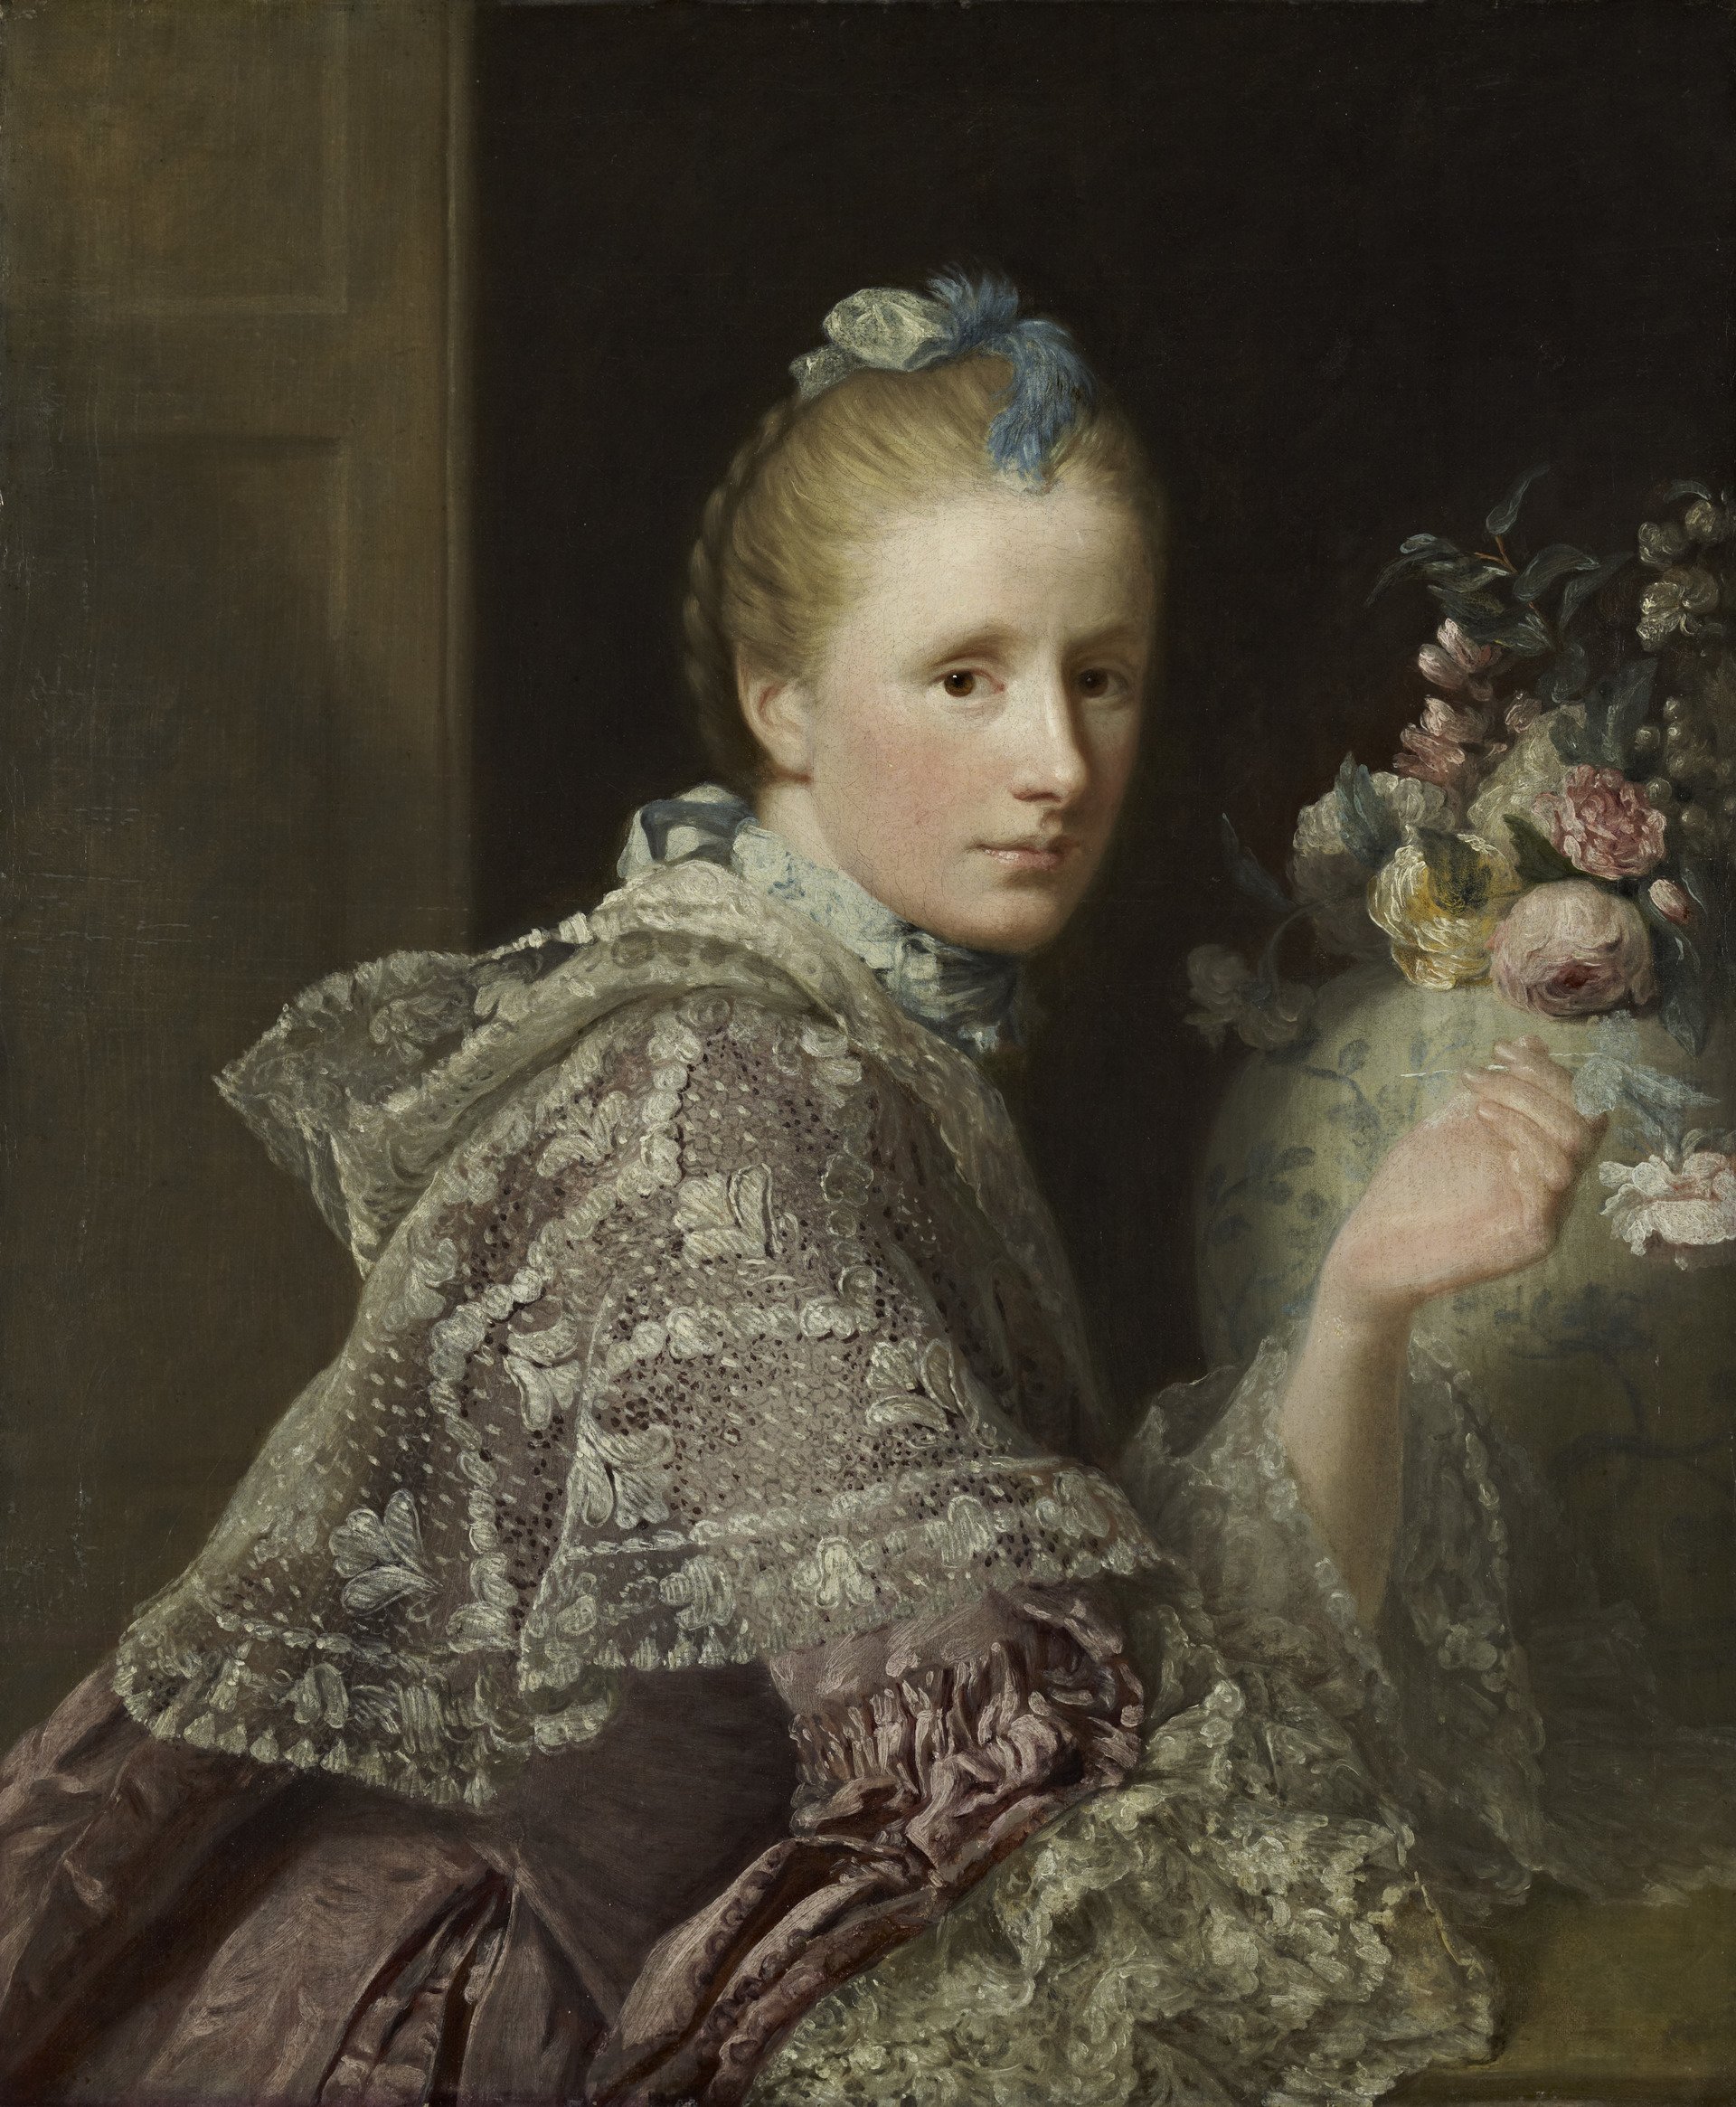 Allan Ramsay, Margaret Lindsay of Evelick: The Artist's Wife, about 1726-1782, c. 1758-60. Oil on canvas, 74.30 x 61.90 cm. Courtesy National Galleries Scotland, Edinburgh.